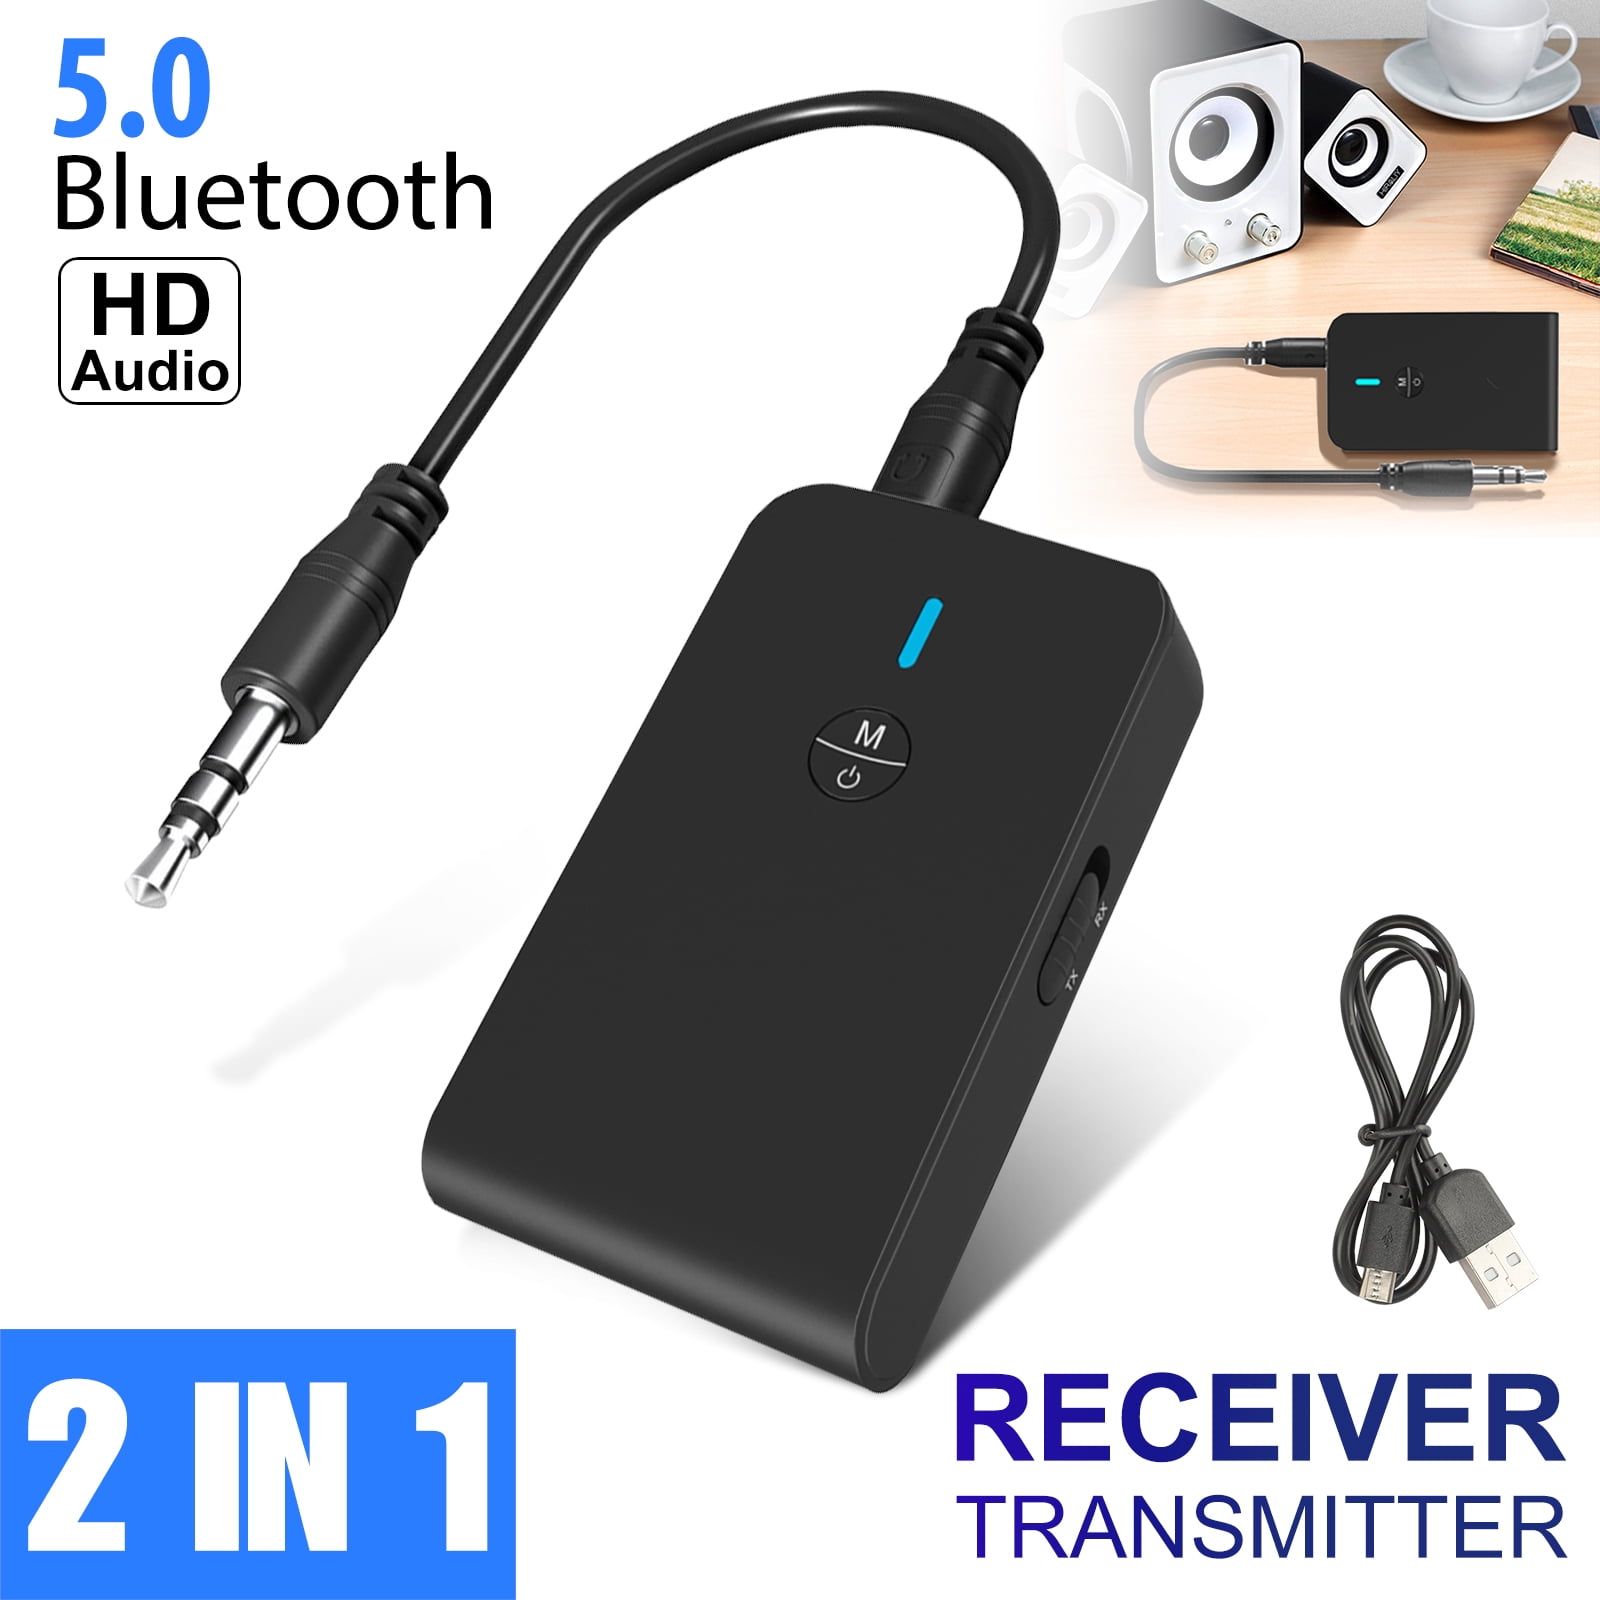 Bluetooth 5.0 Transmitter and Receiver for TV PC 3.5mm AUX RCA Stereo Output 3-in-1 Wireless Bluetooth Adapter with LED Screen Low Latency for Car Home Sound System 